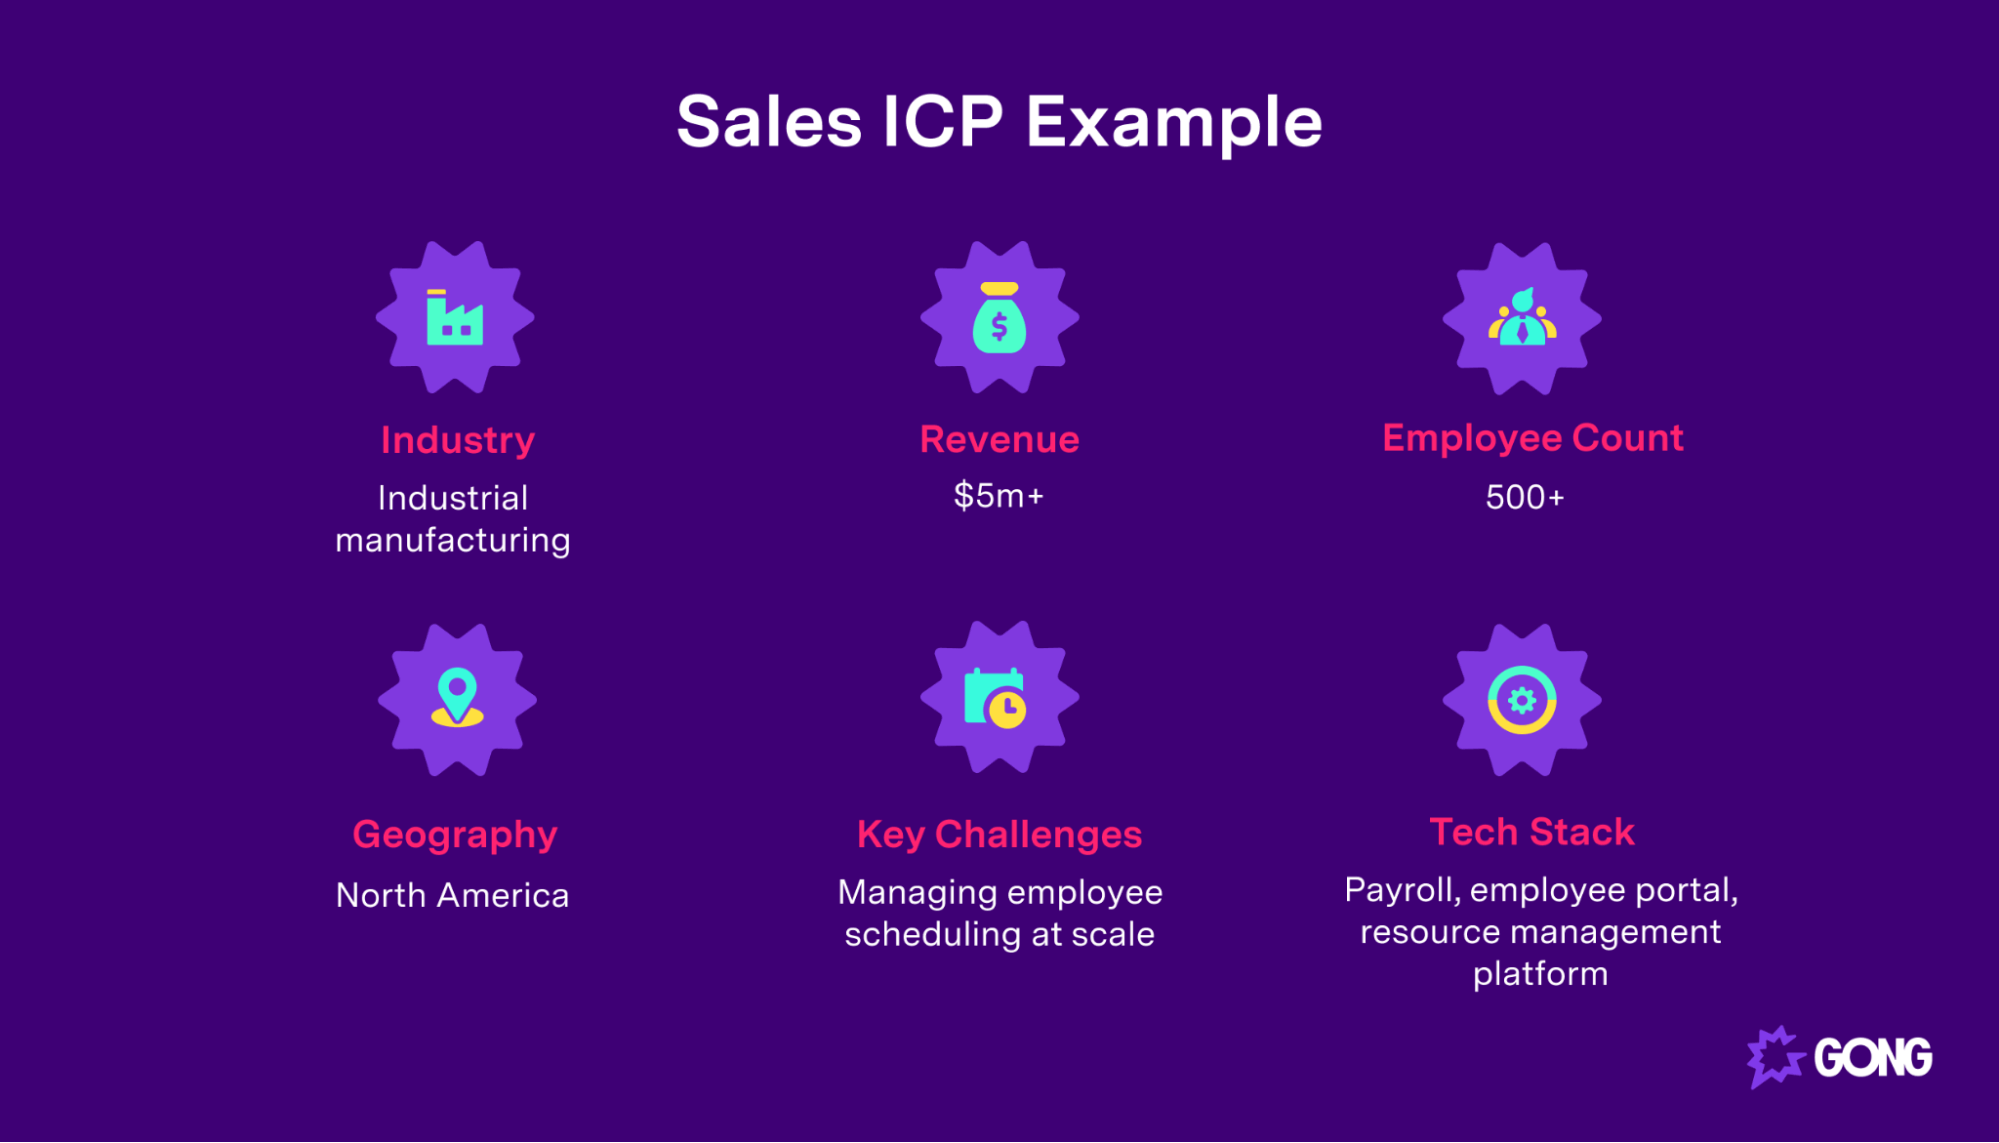 An example of a sales ICP